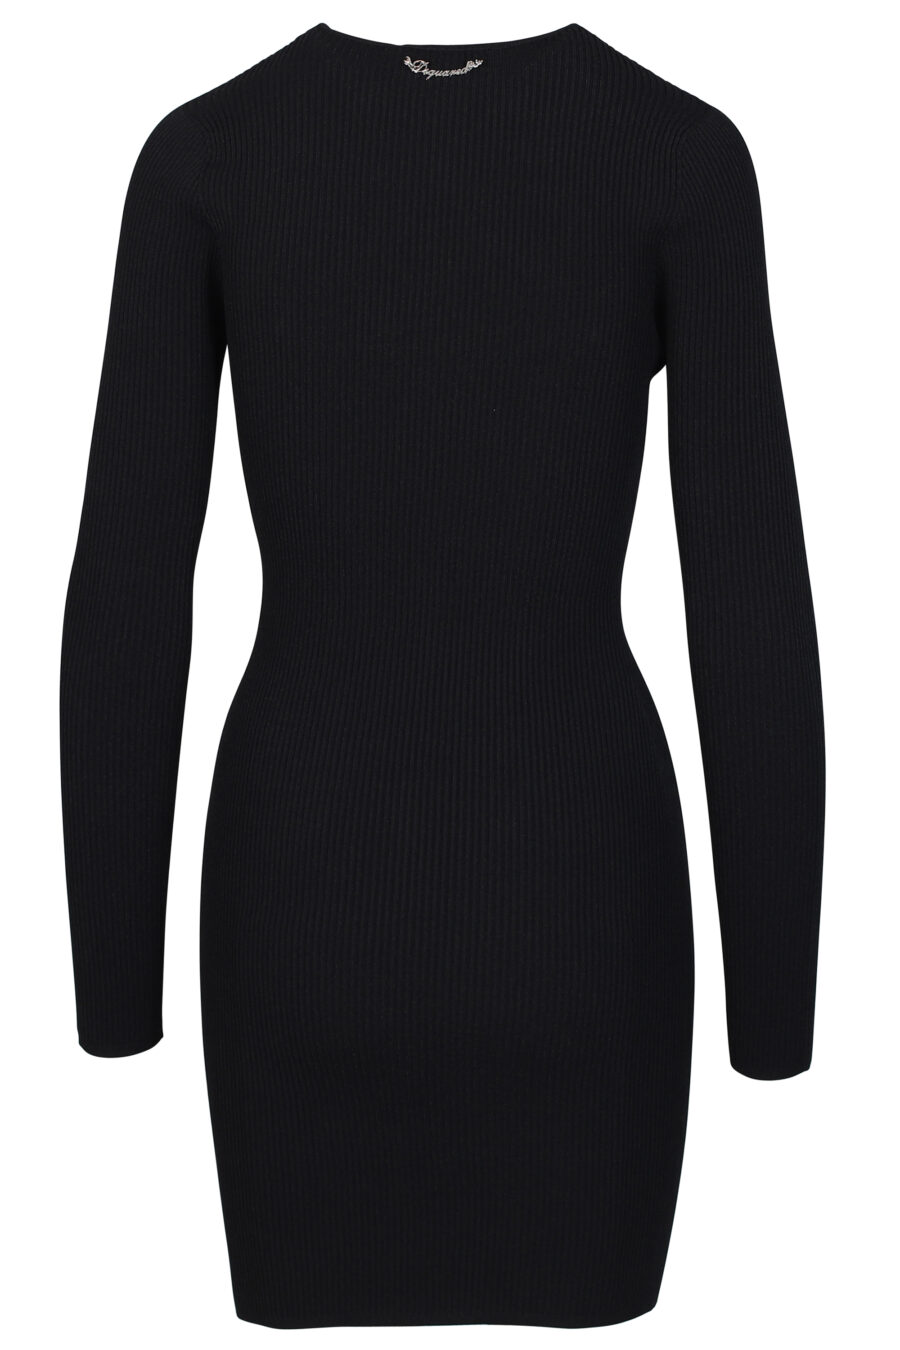 Short black "Cut-Out" dress with long sleeves and neckline - 8054148010836 3